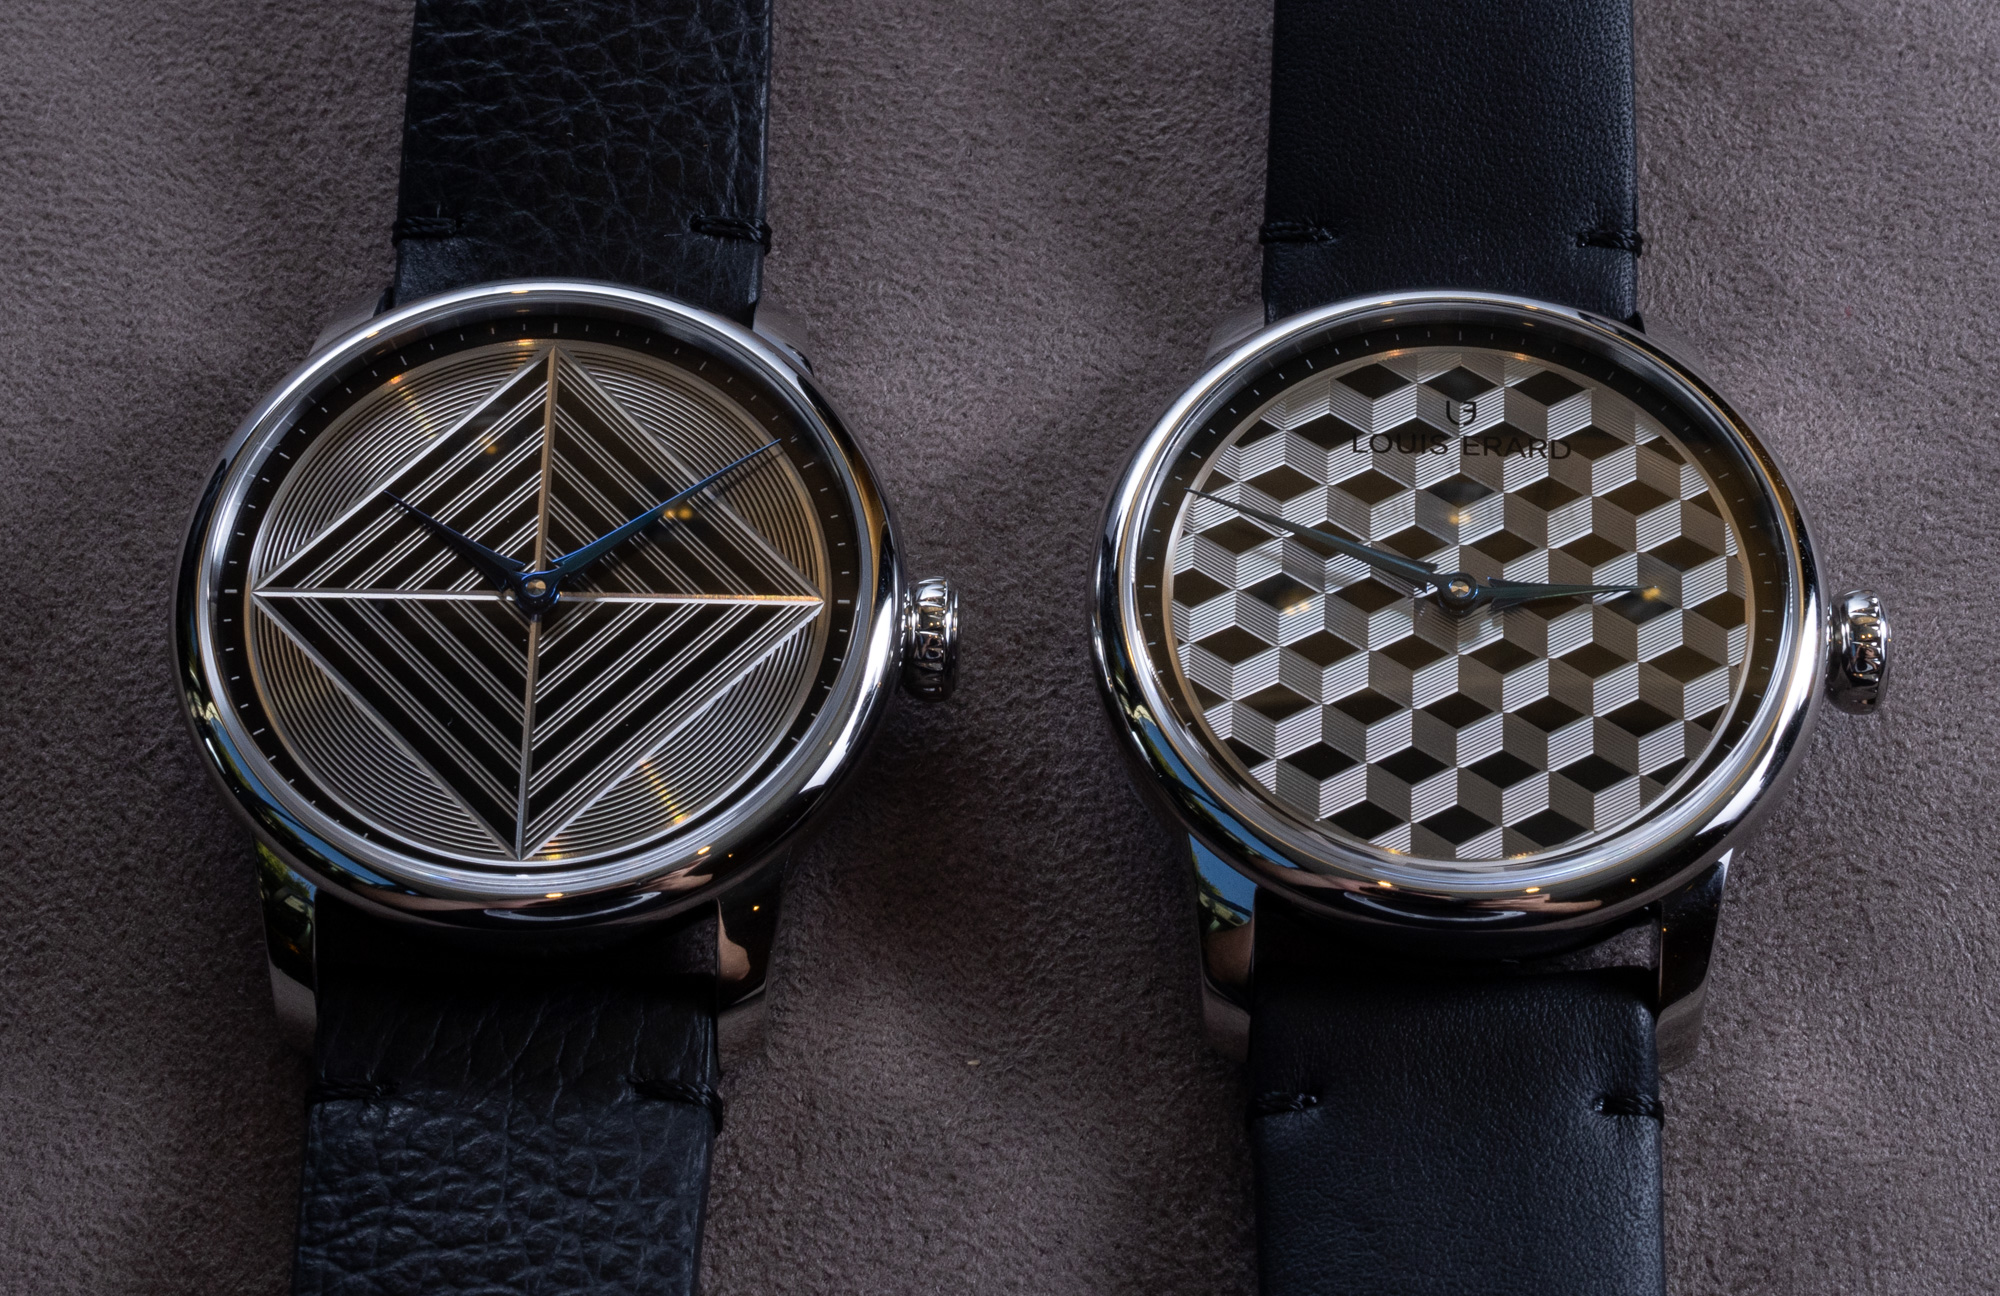 Introducing: Louis Erard Excellence Guilloché Main - Oracle Time